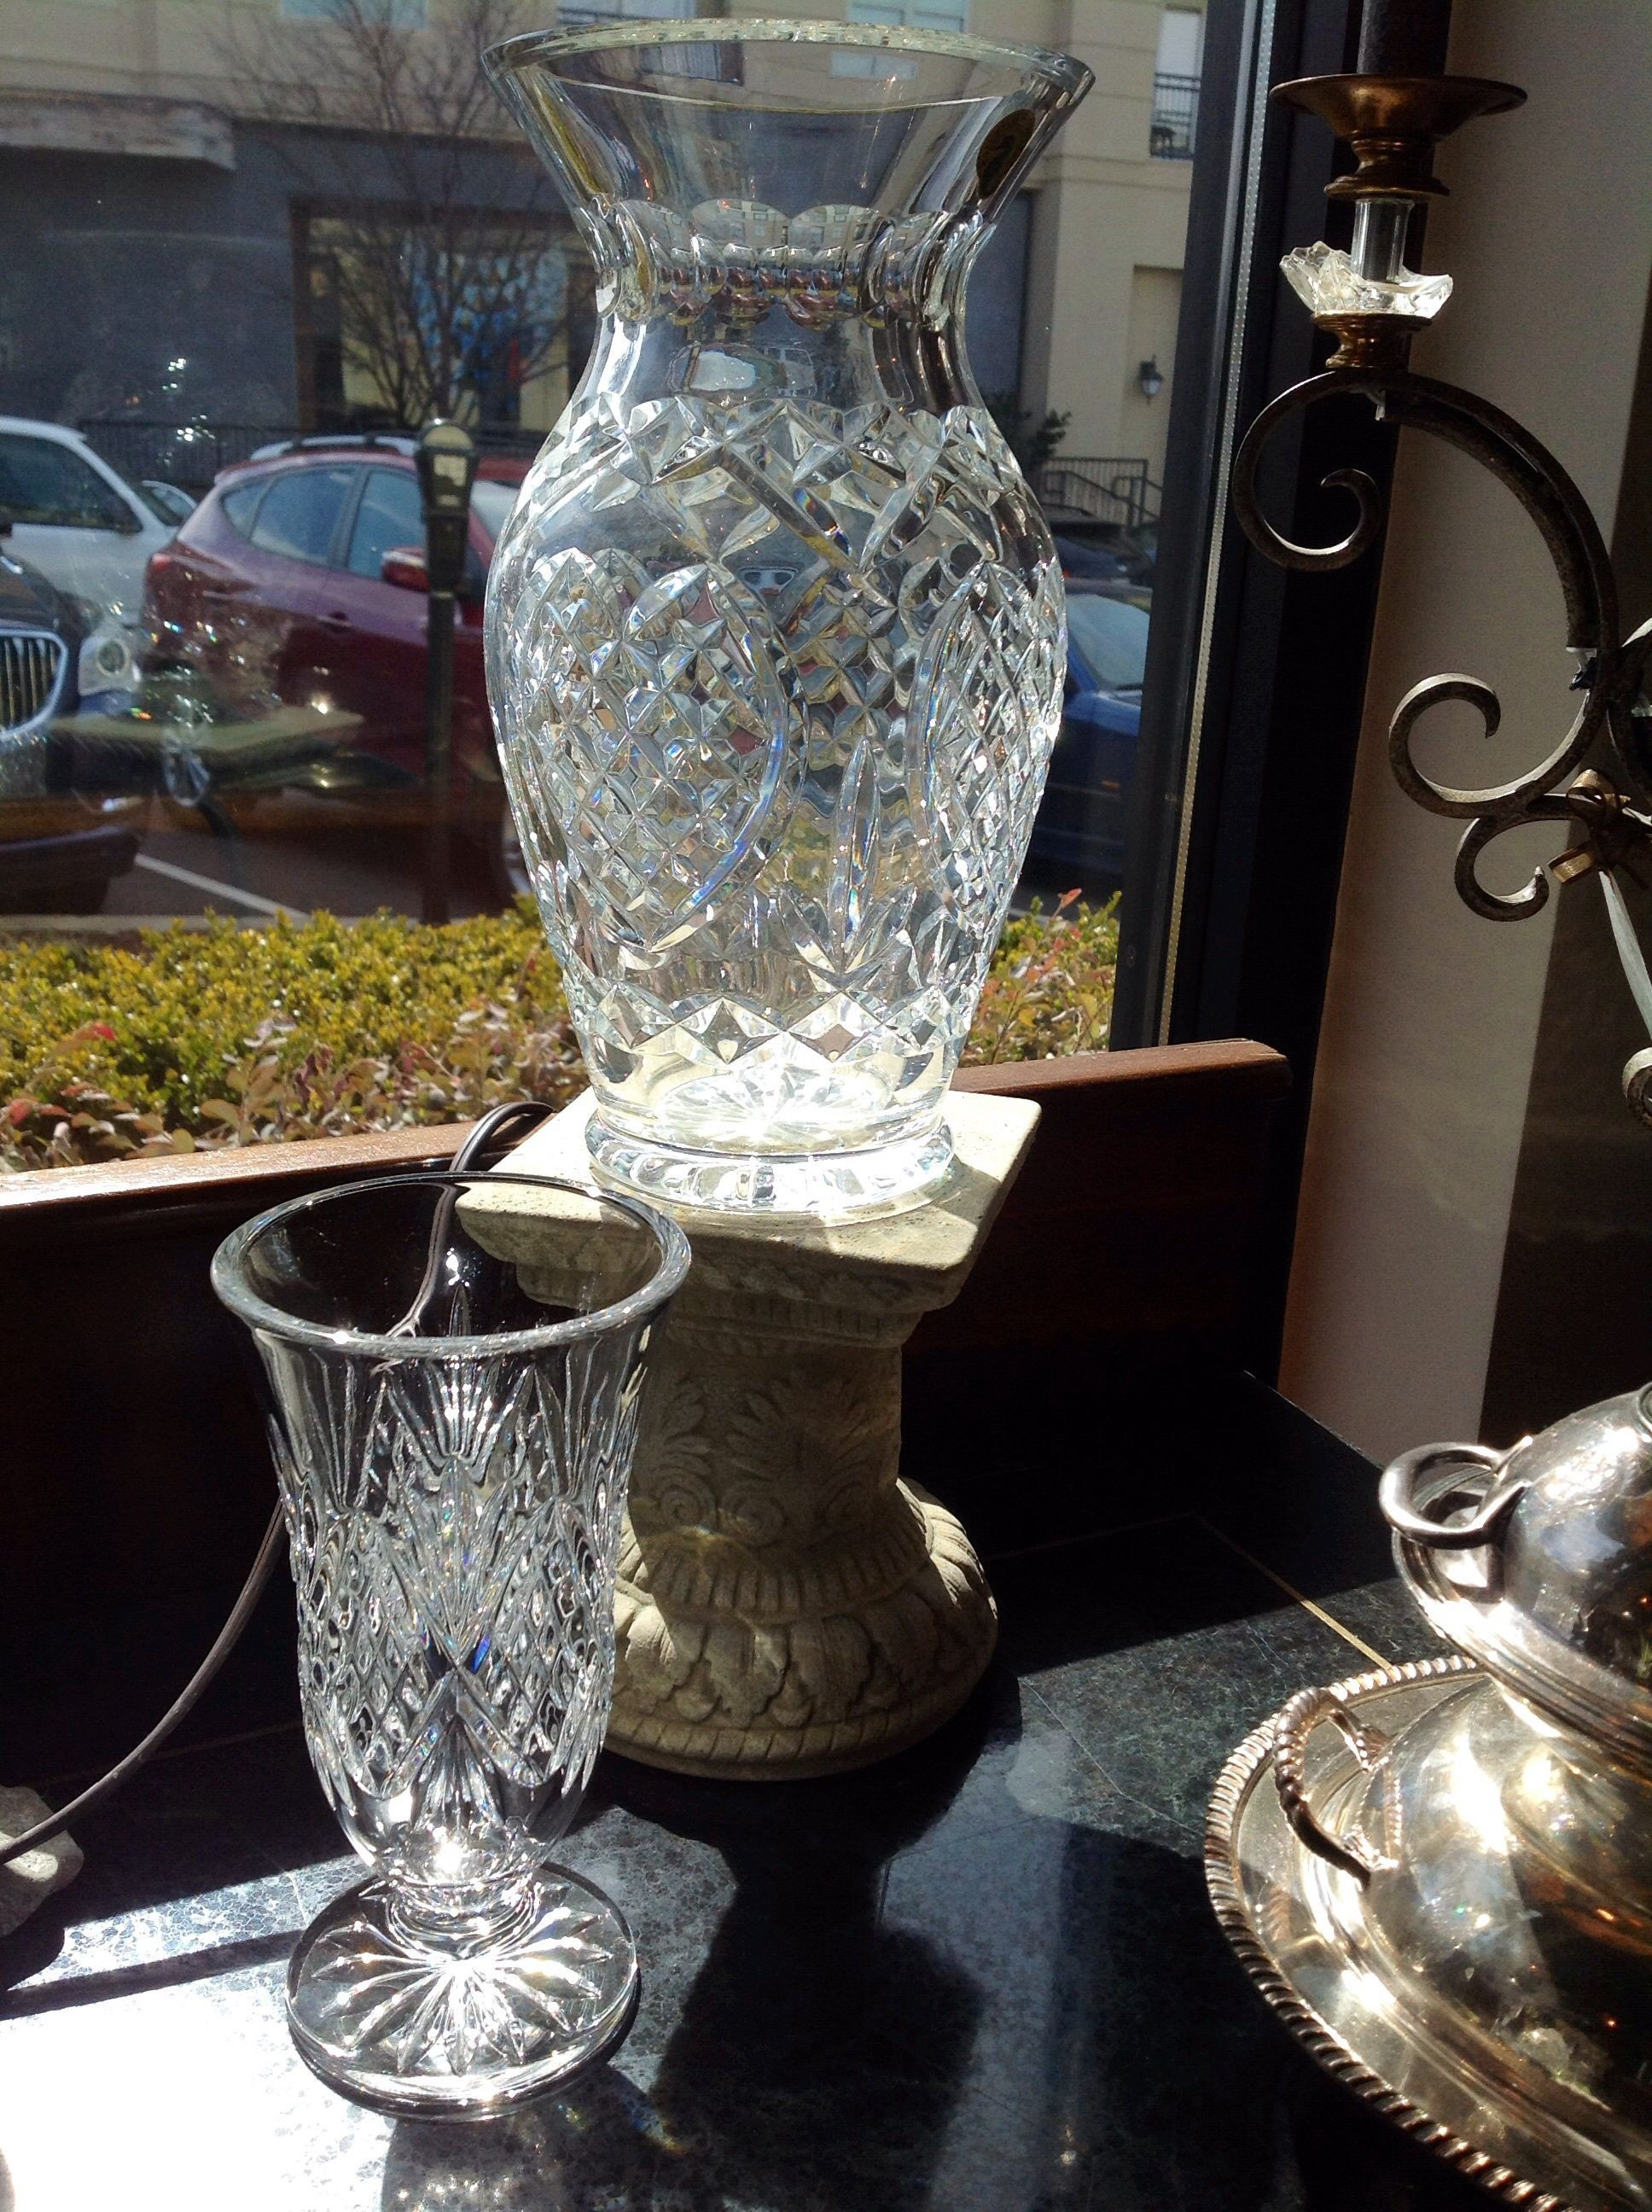 12 attractive Old Waterford Crystal Vase 2024 free download old waterford crystal vase of waterford crystal vases image waterford crystal vase 225 00 small pertaining to waterford crystal vase 225 00 small 65 00 call le villa in